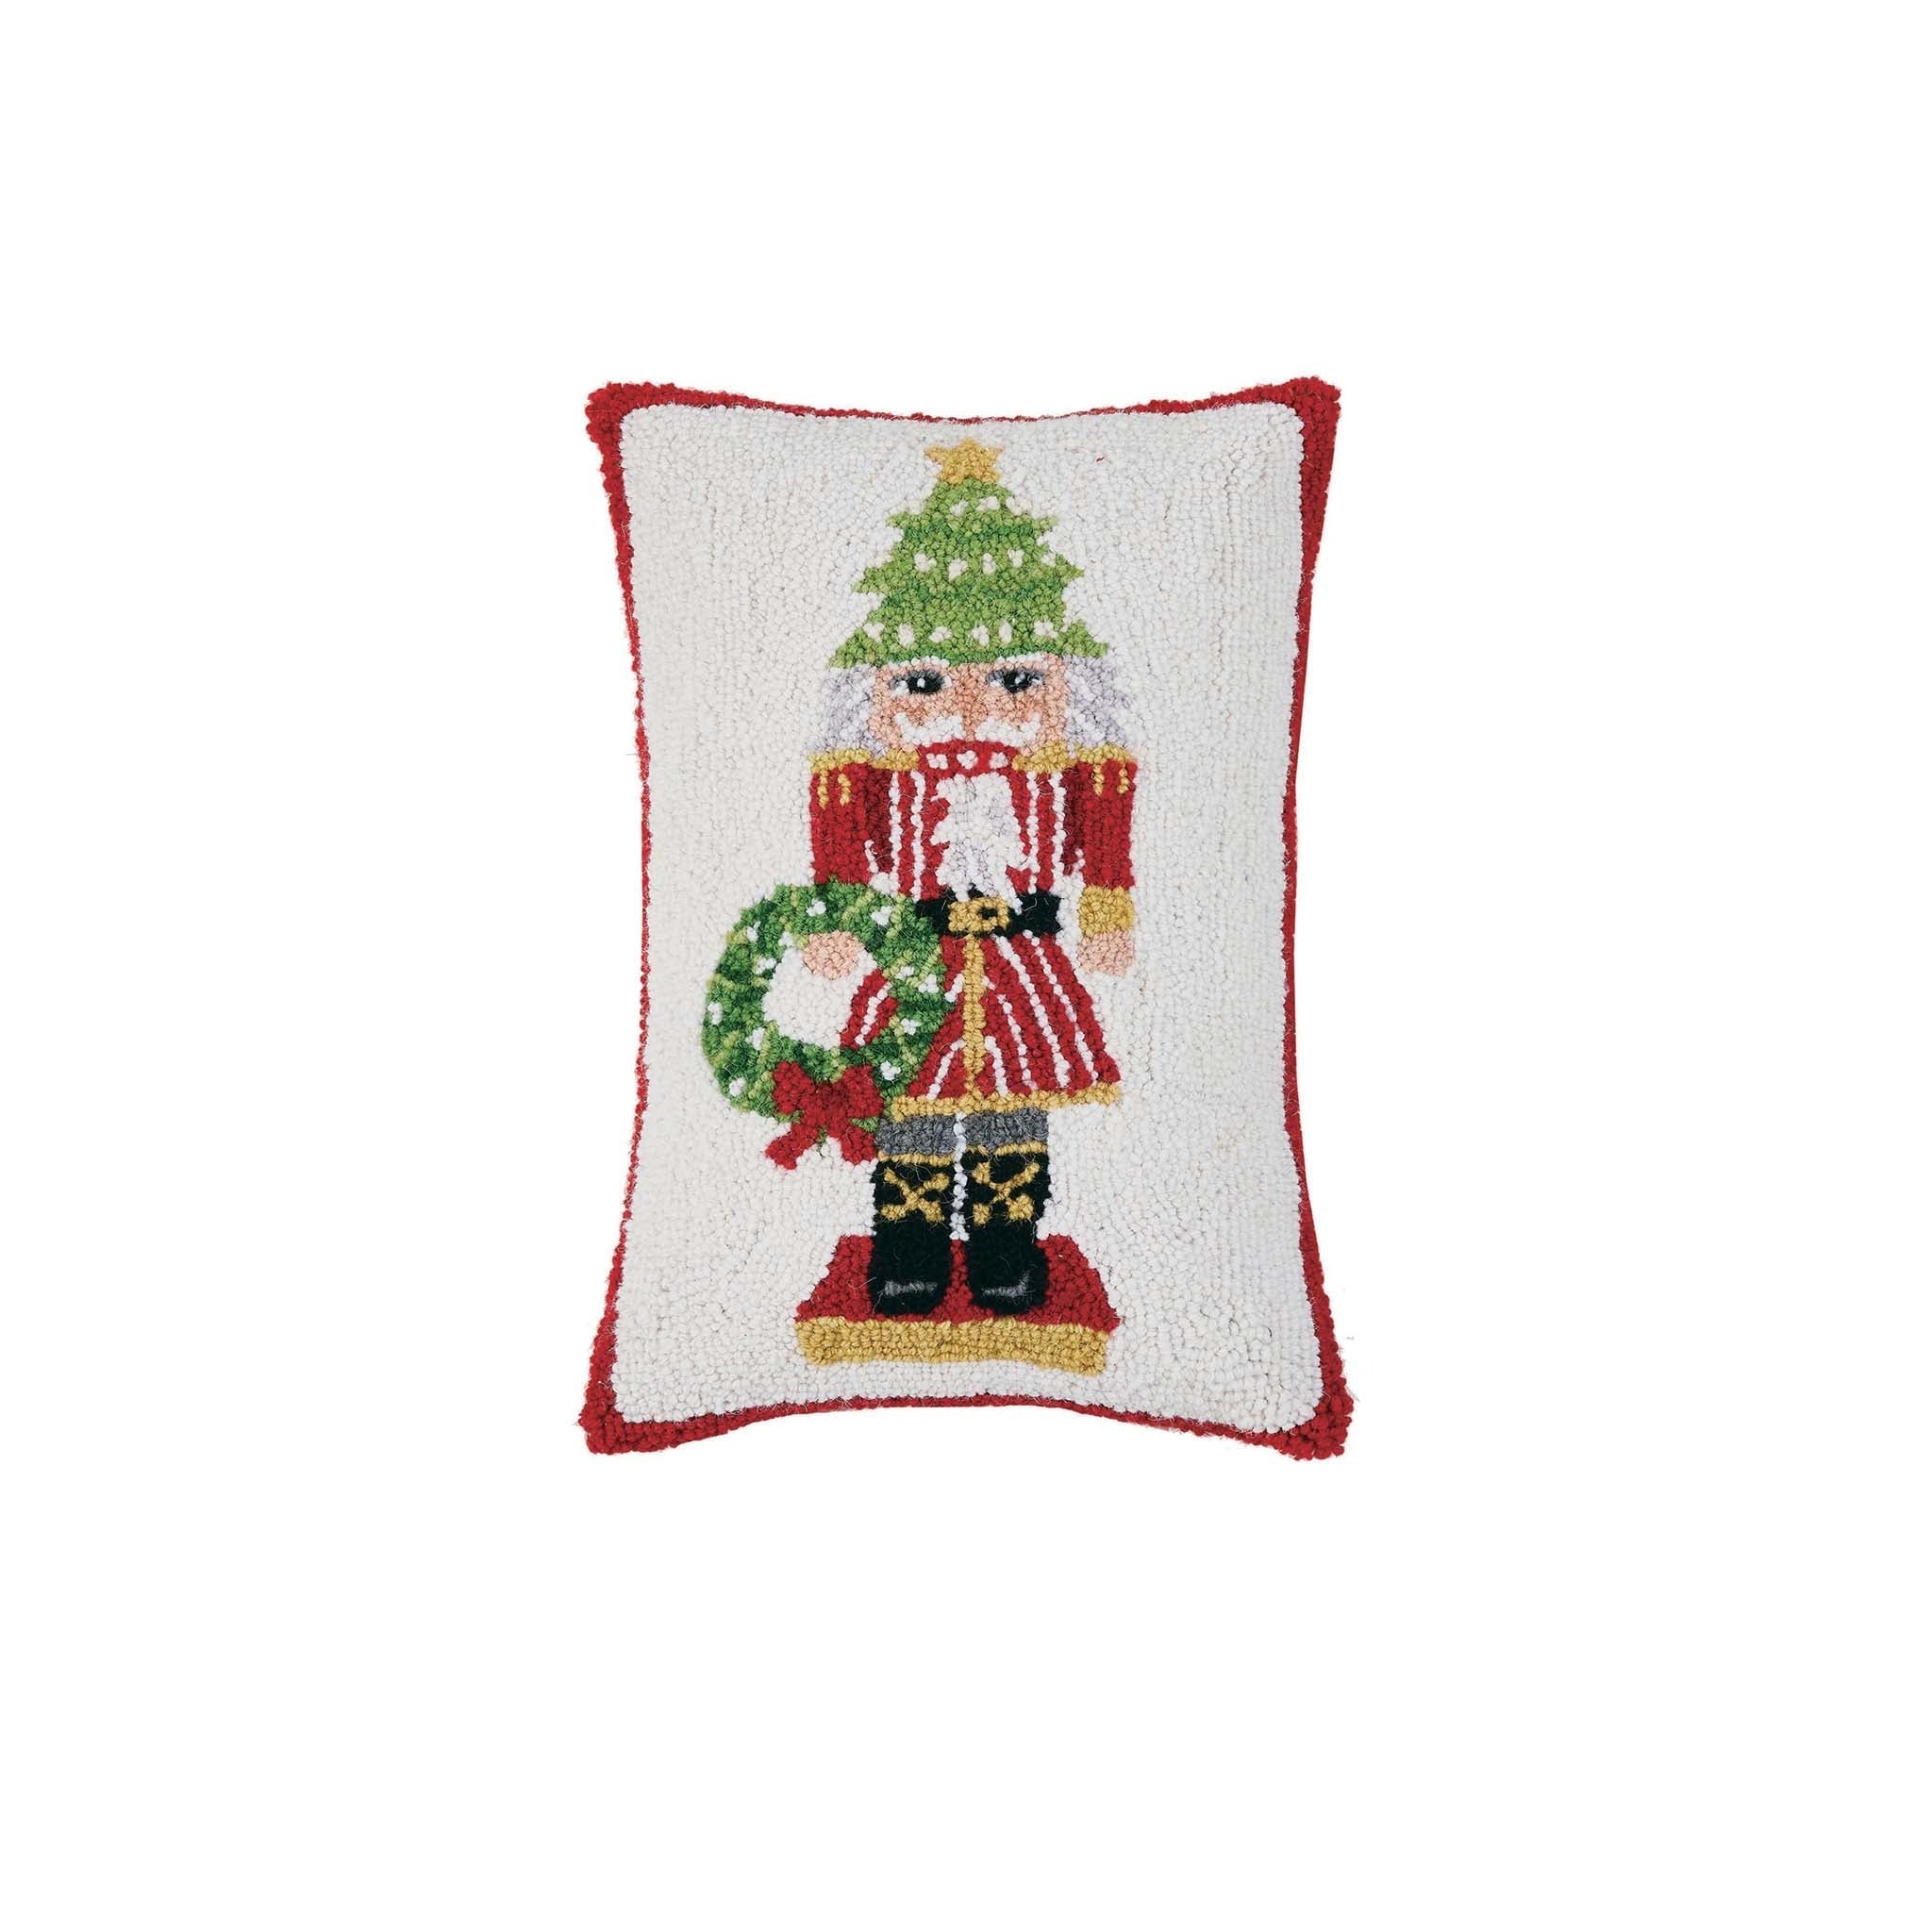 Father Christmas Nutcracker Hooked Pillow